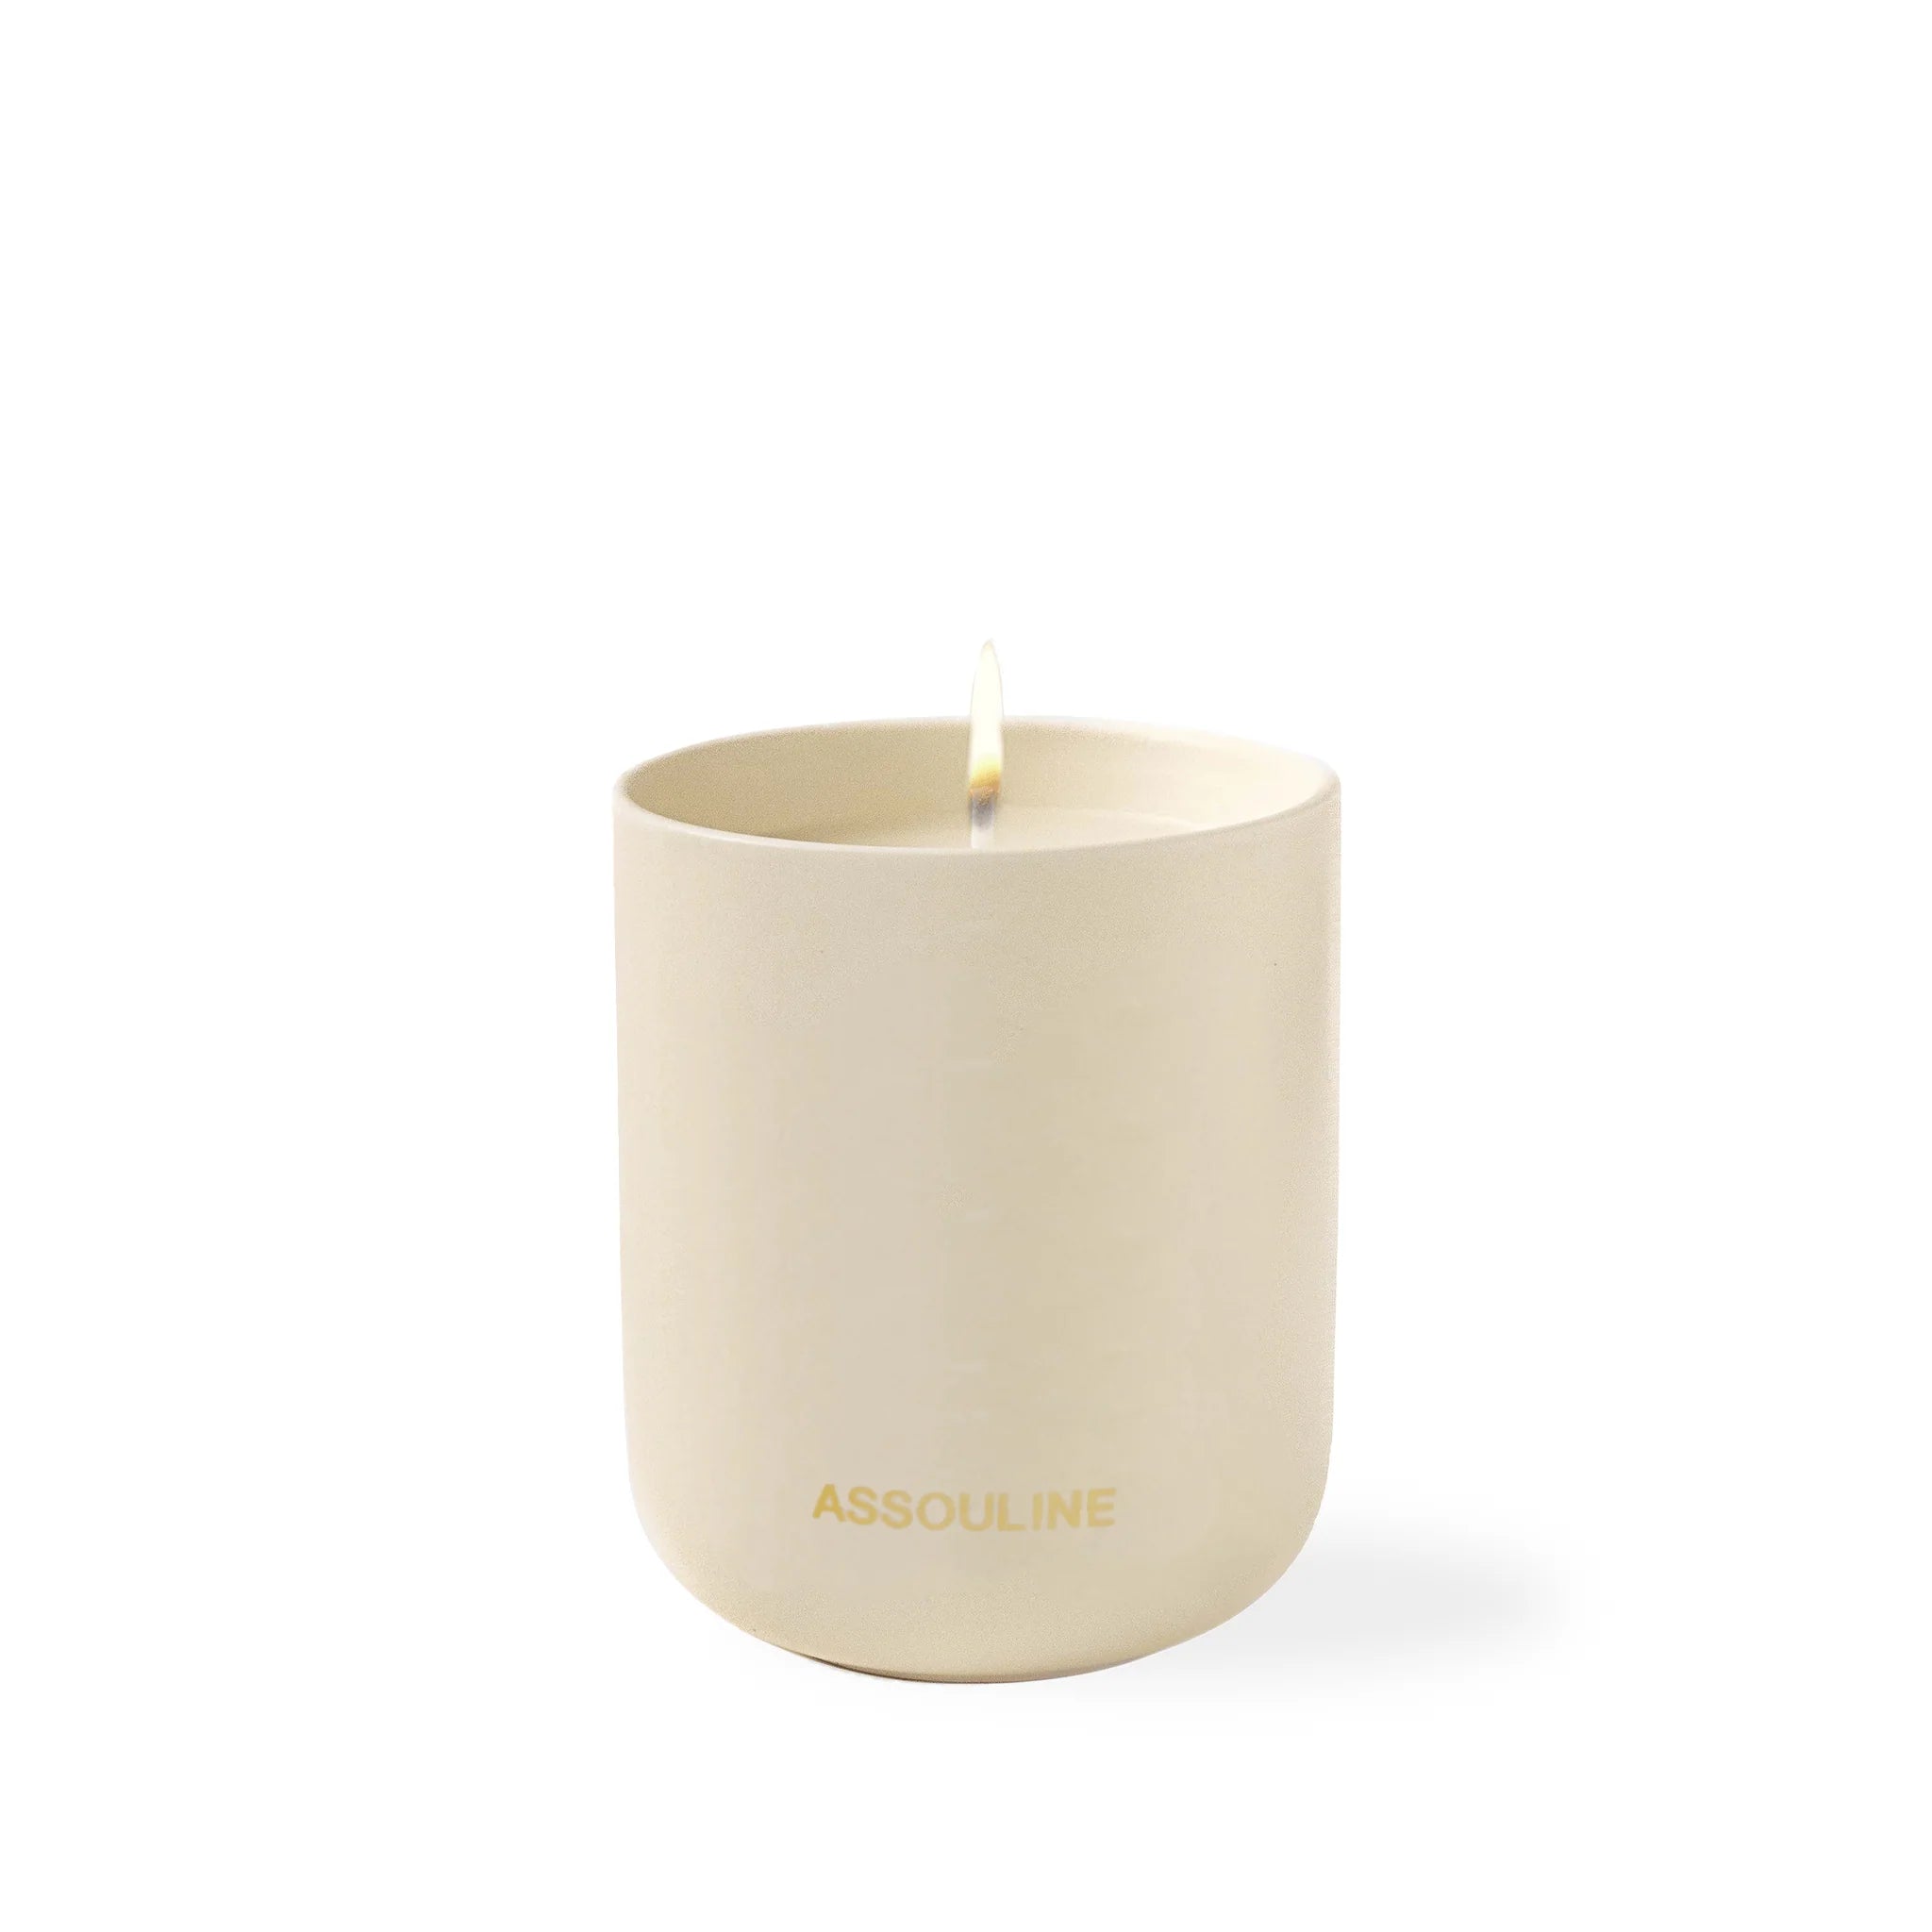 Travel From Home Candle - Marrakech Flair